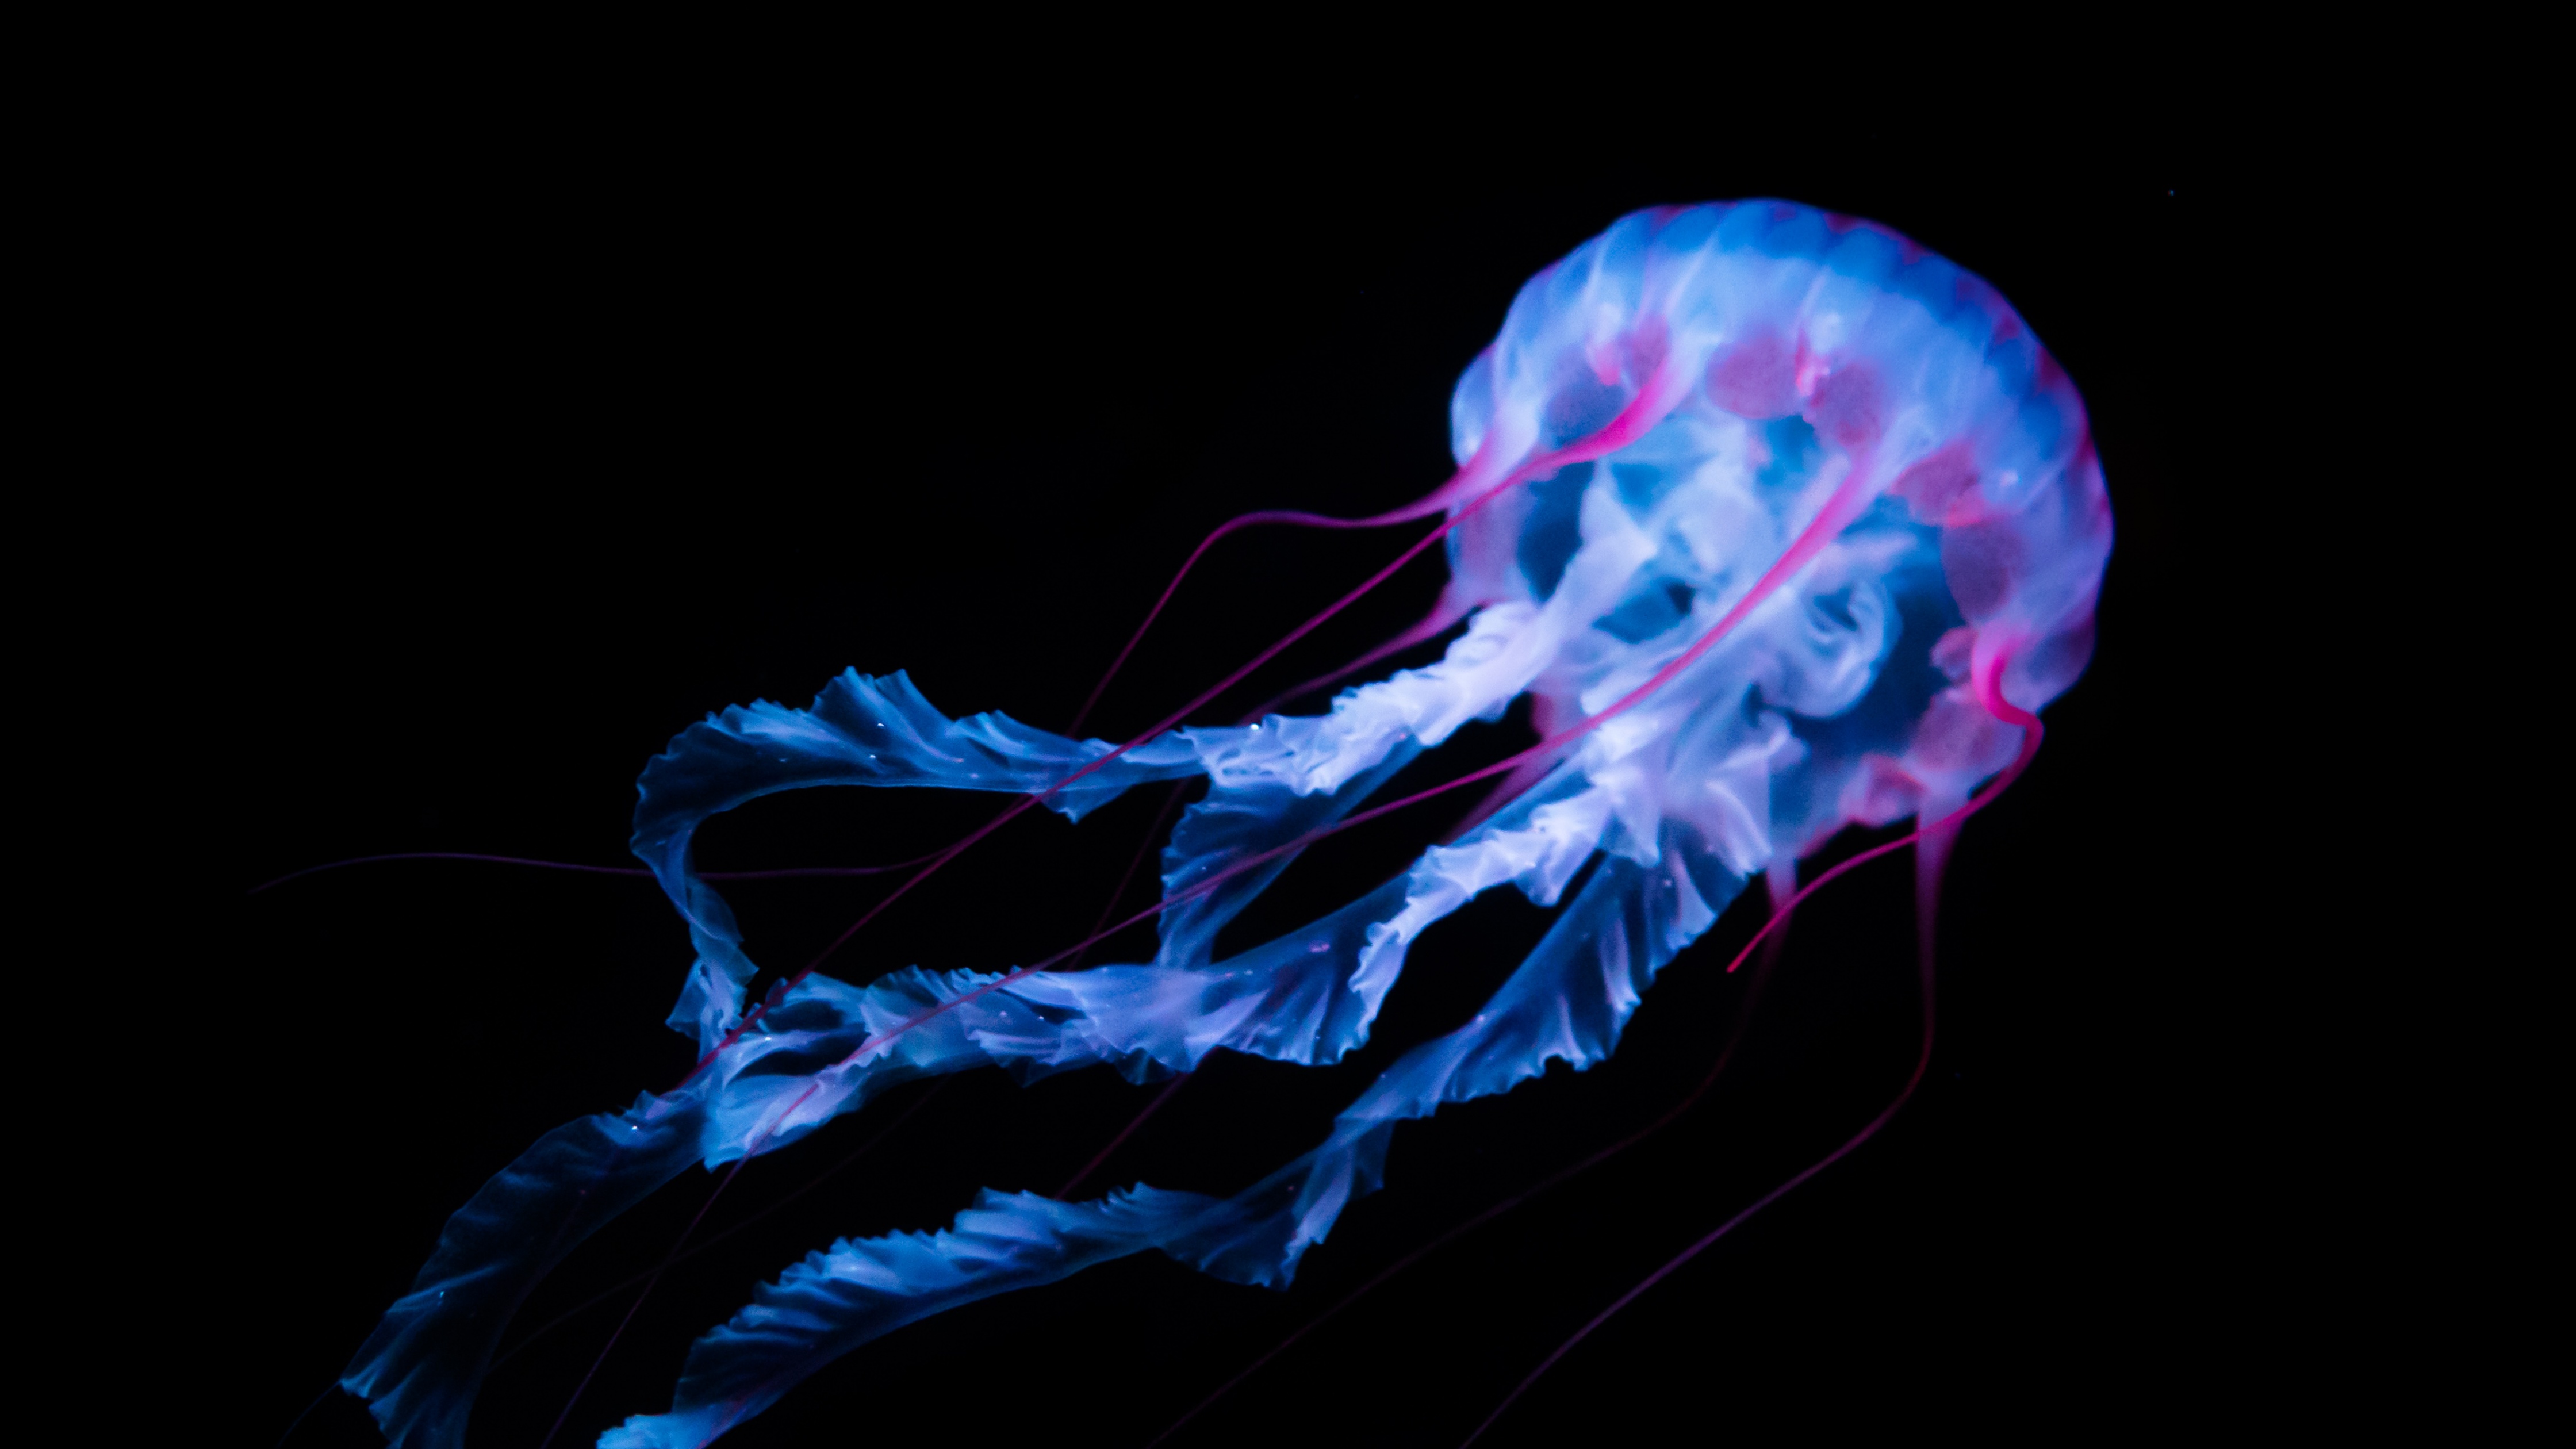 881 Jellyfish Wallpaper Stock Video Footage - 4K and HD Video Clips |  Shutterstock